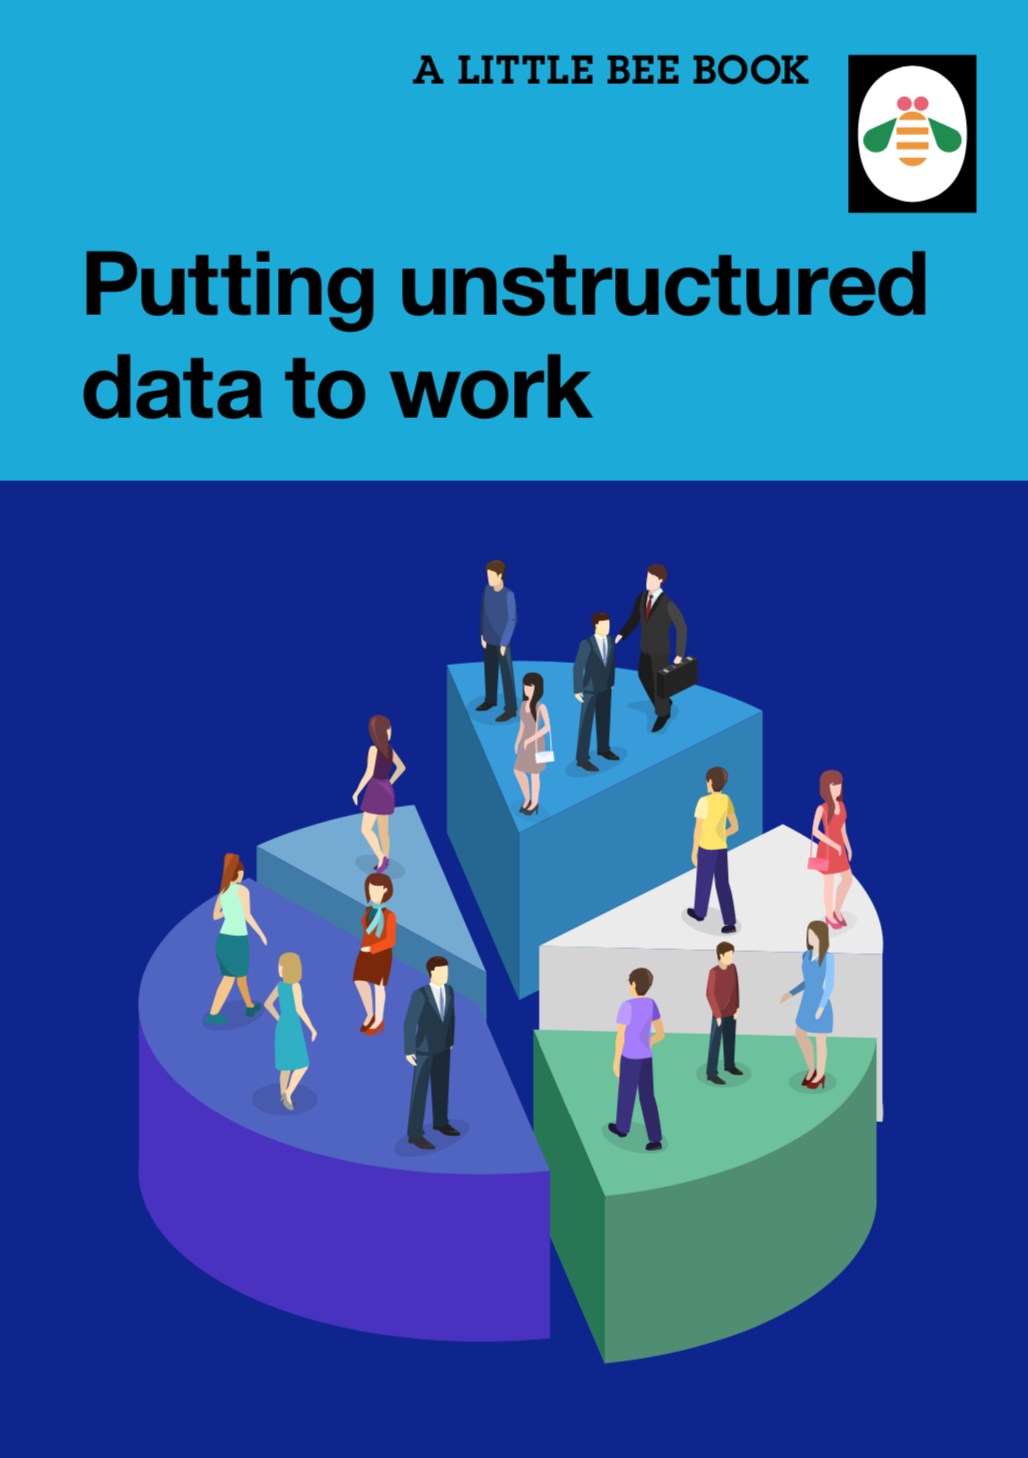 Putting unstructured data to work